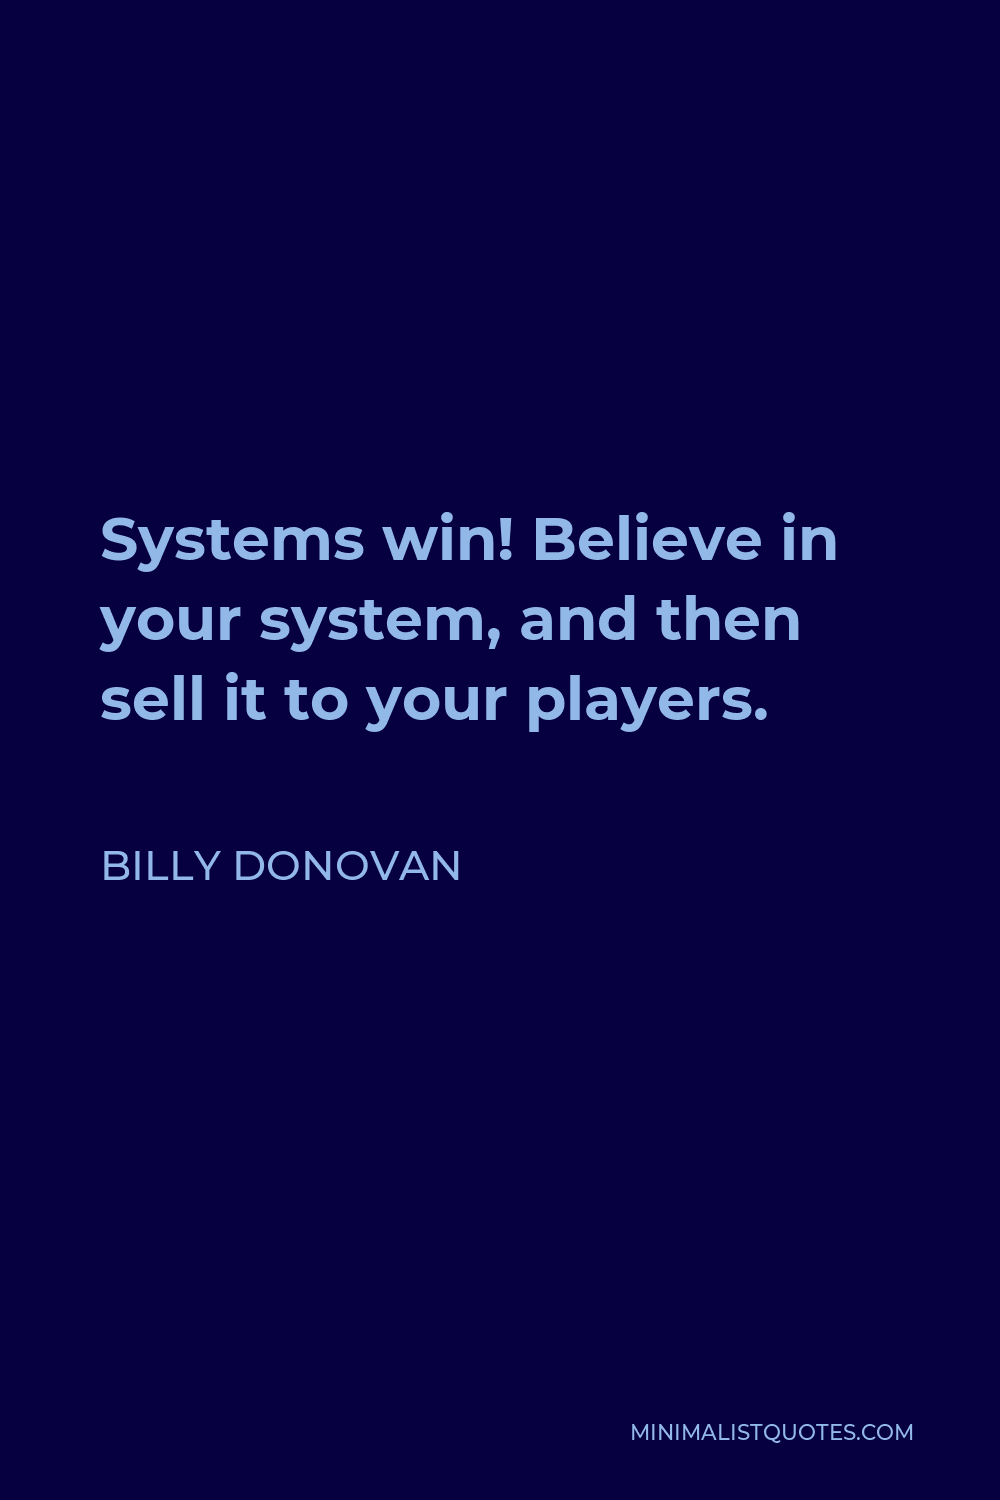 Billy Donovan Quote - Systems win! Believe in your system, and then sell it to your players.